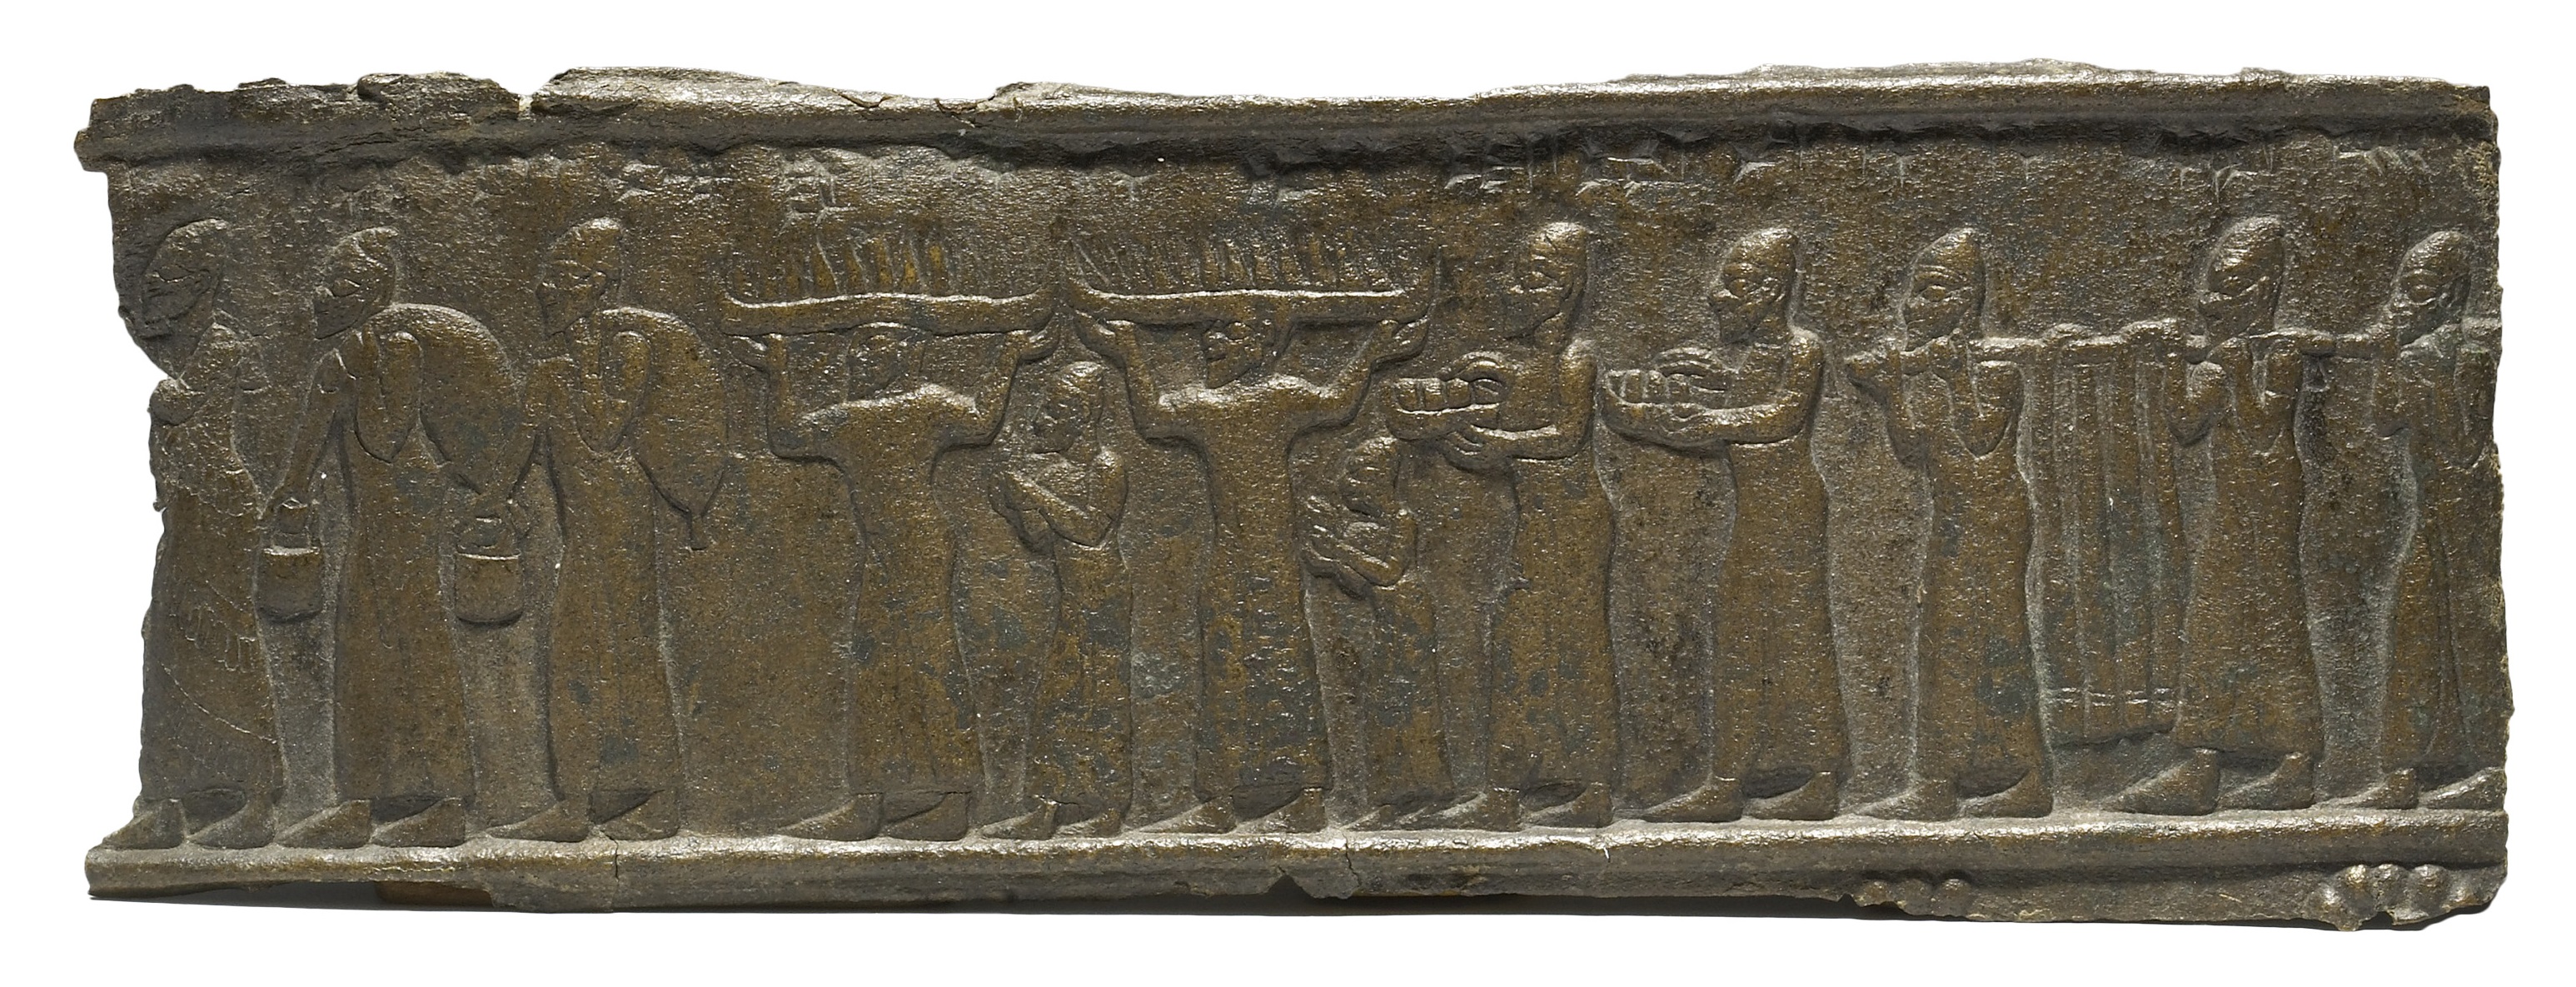 band L2 (The Walters Art Museum 54.2335a)